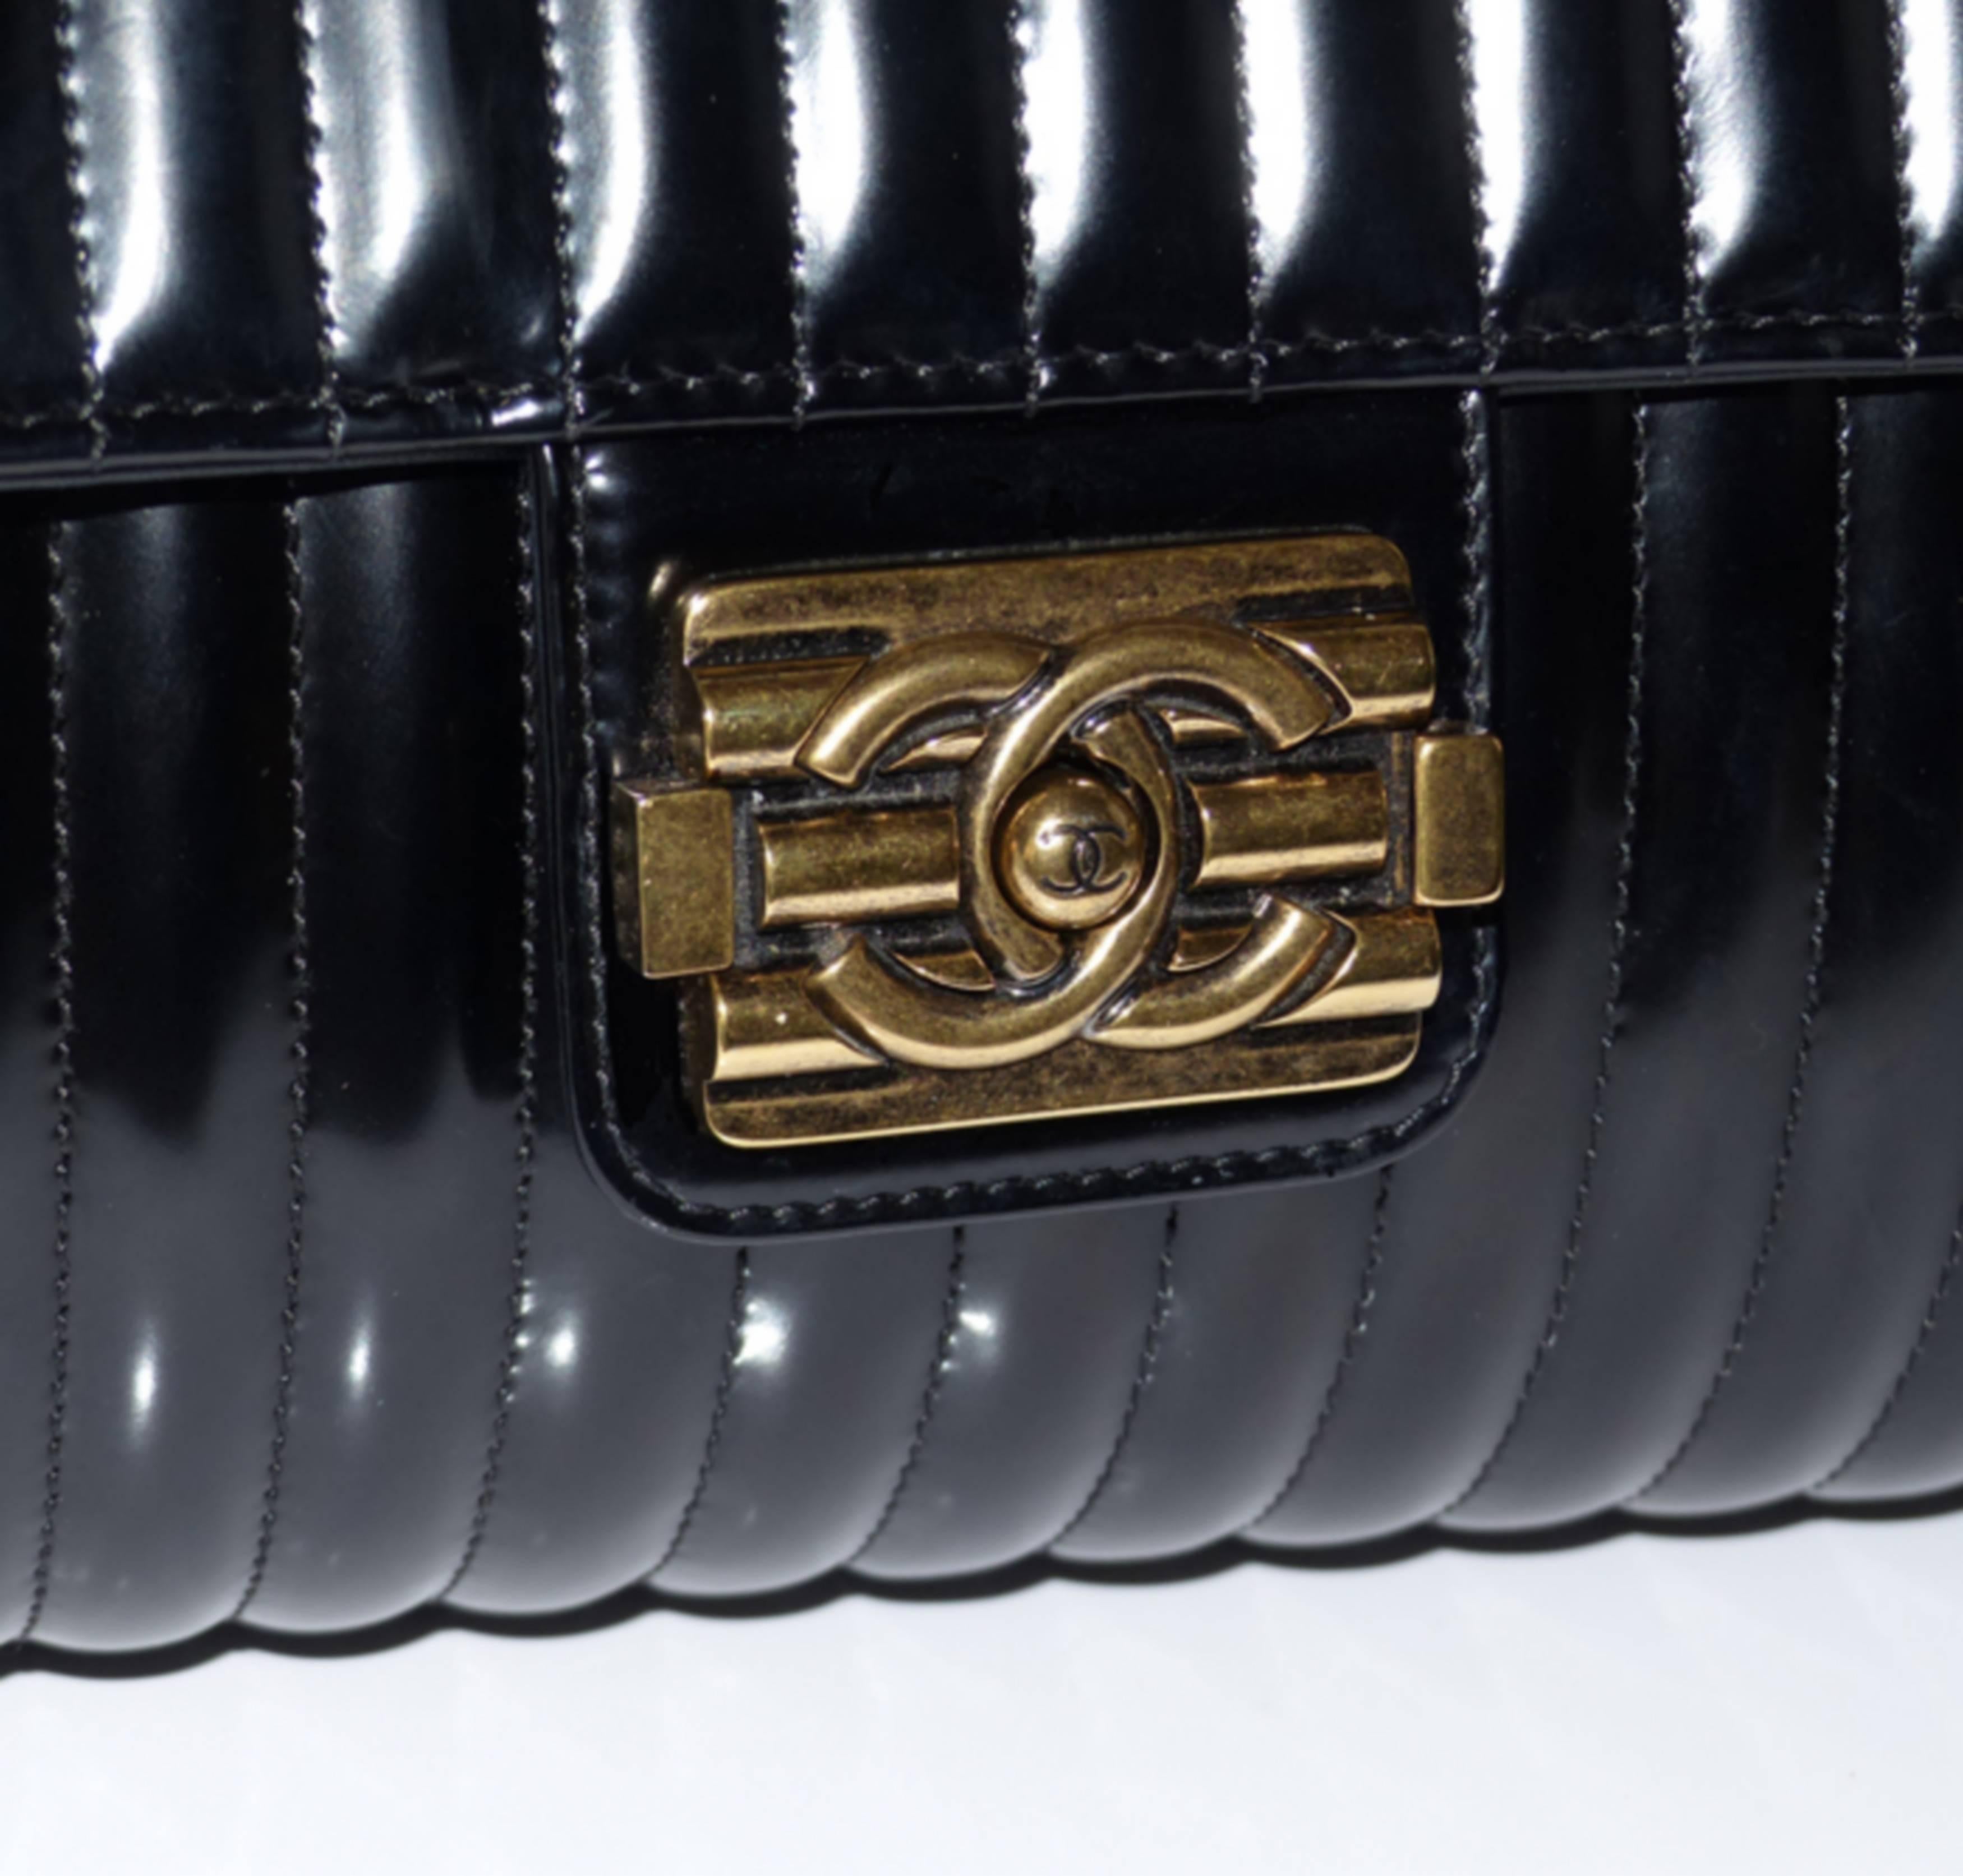 Black COLLECTOR Limited Edition Chanel Bag Collection Paris Venise / Like new 